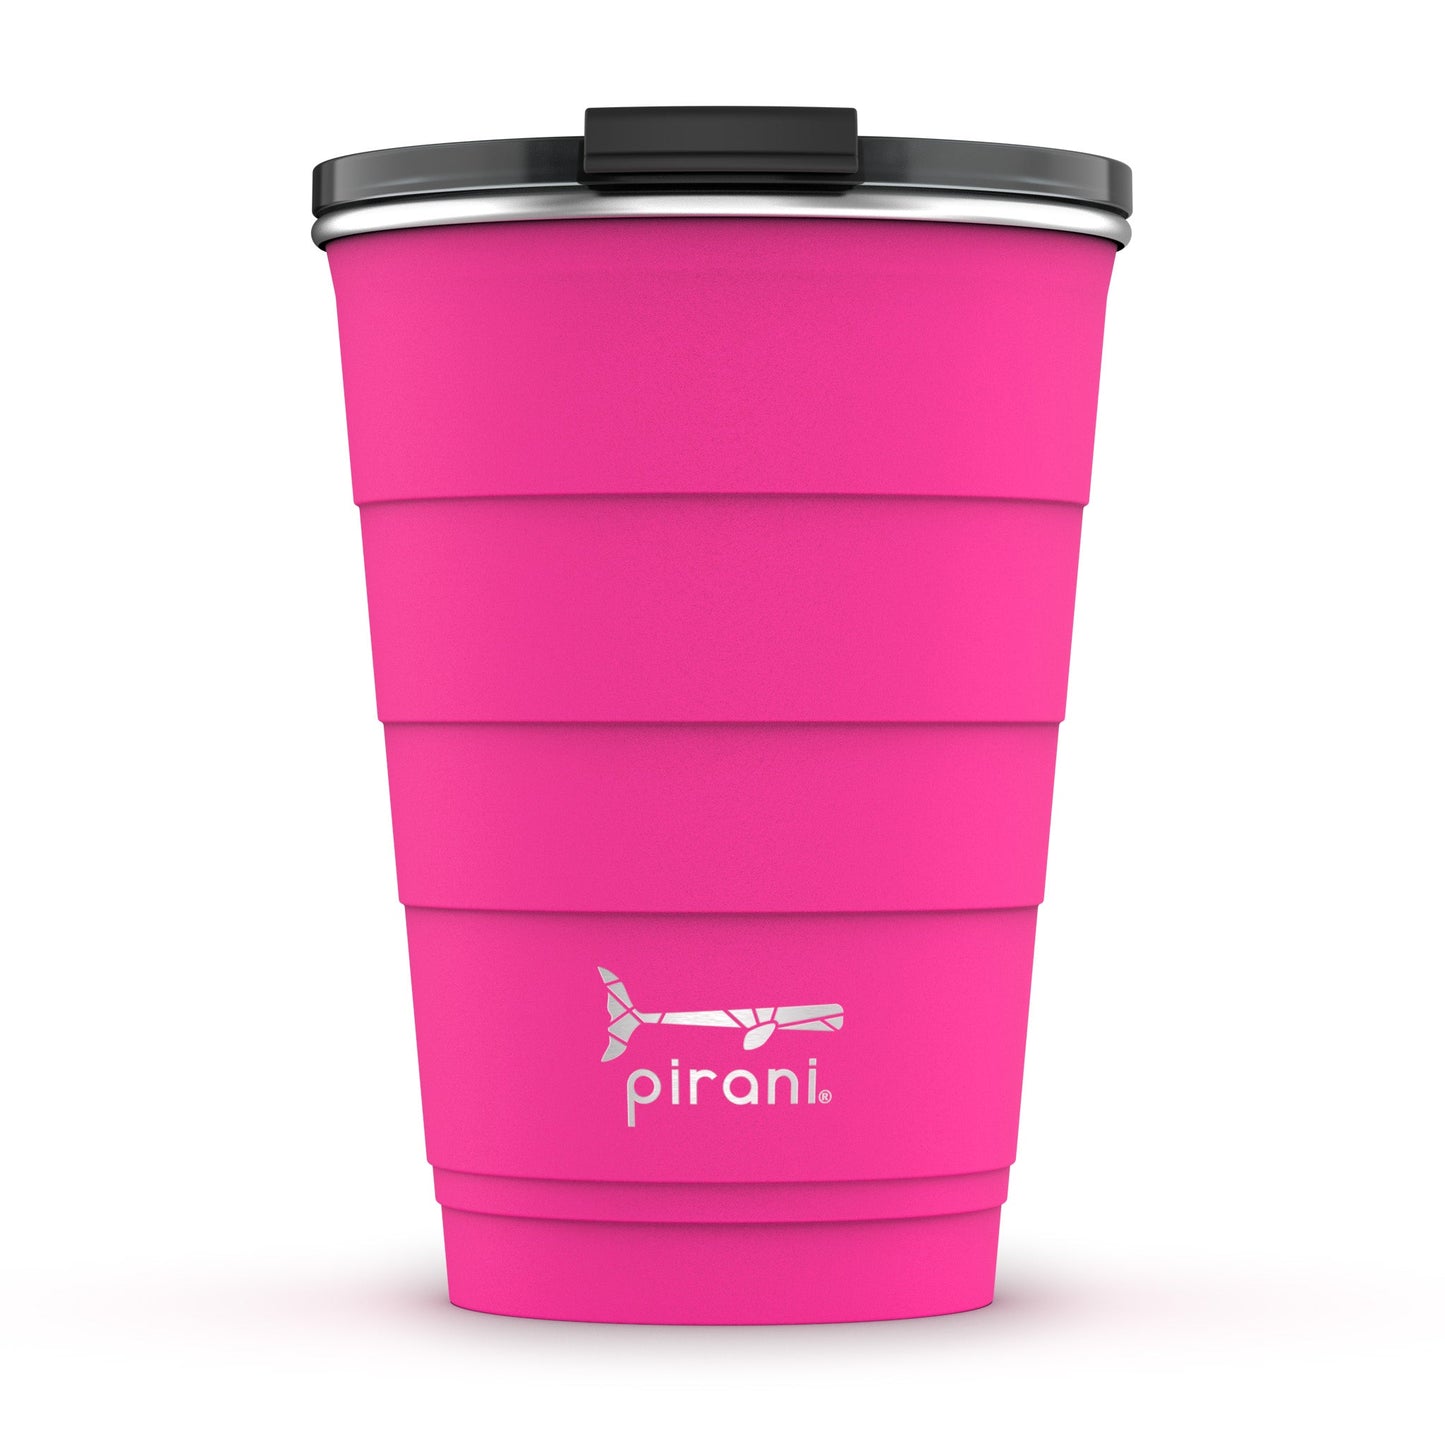 Resolved To Live 16oz Insulated Tumbler